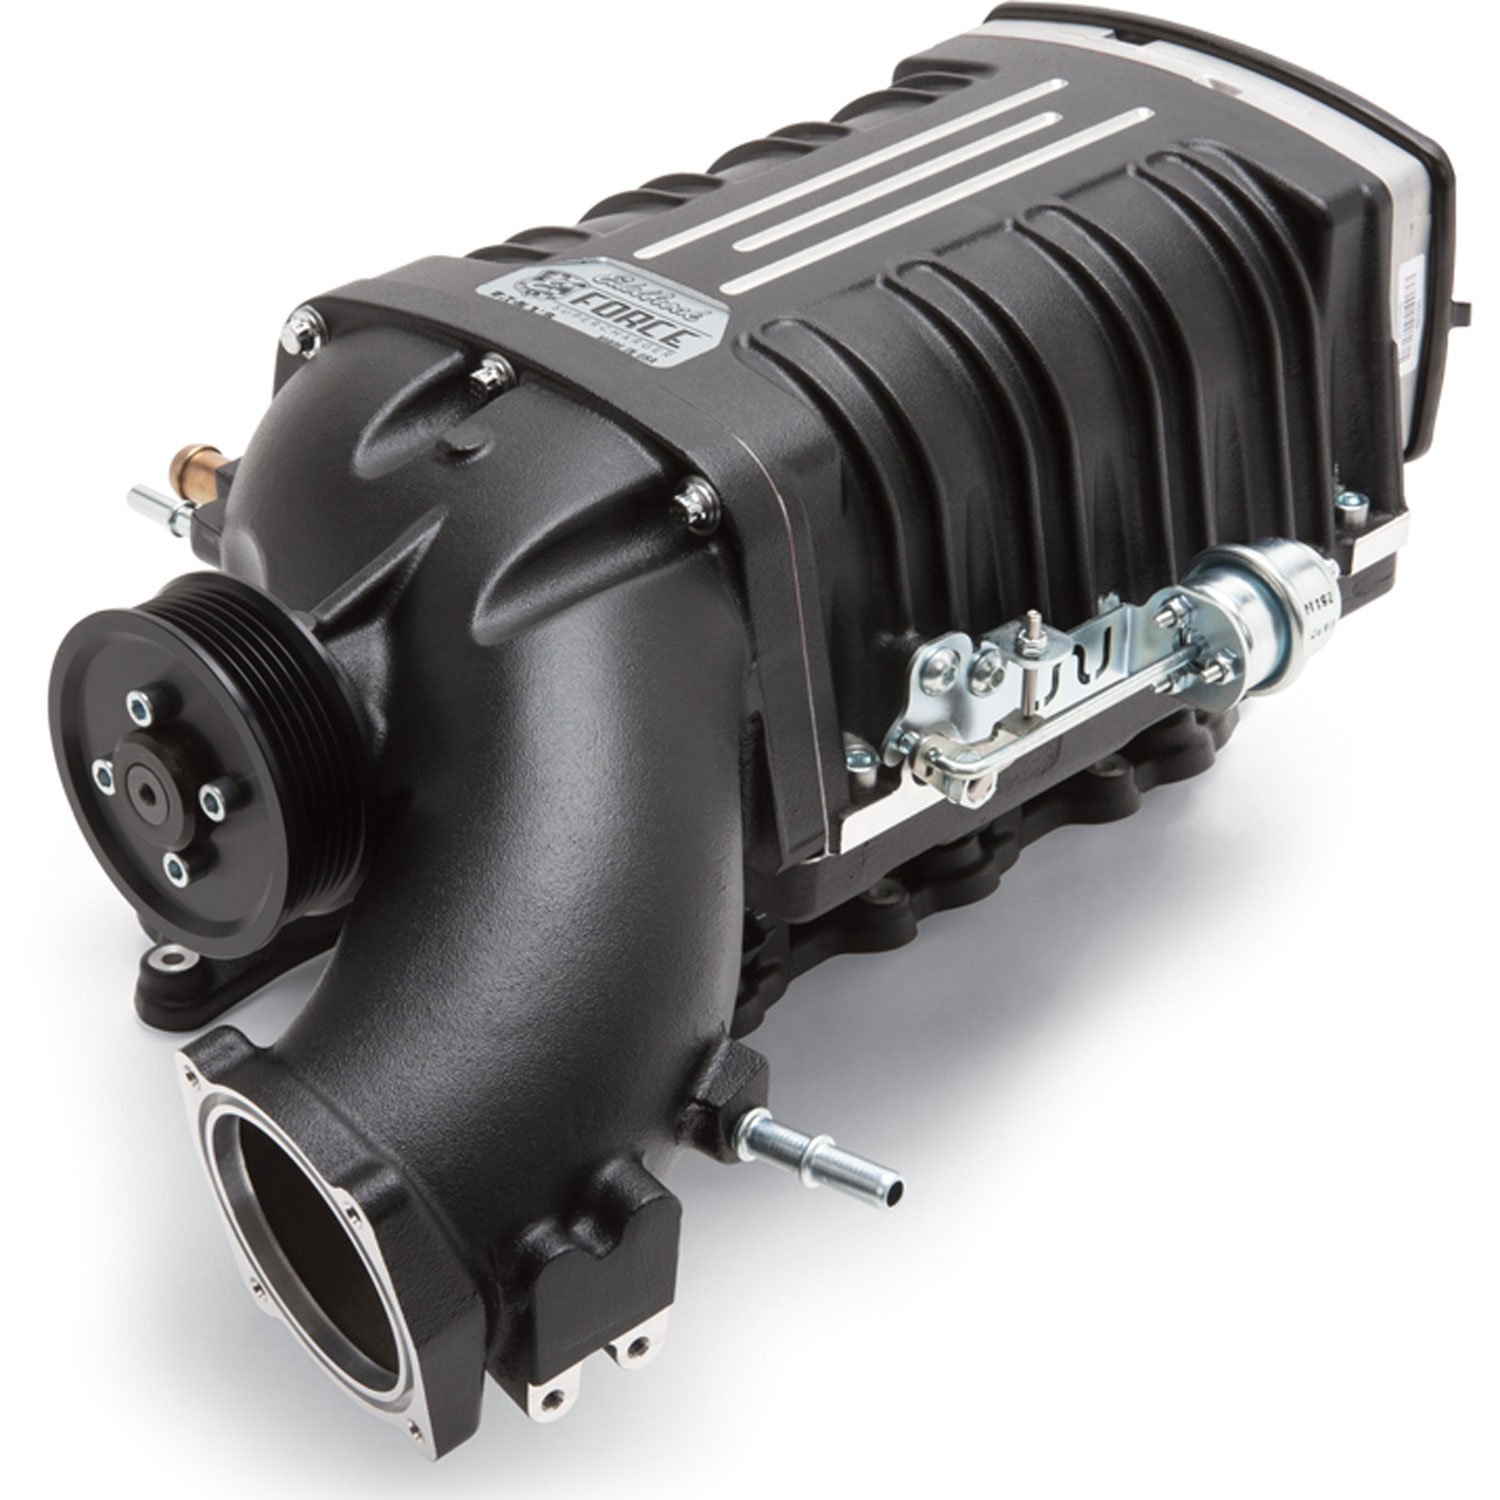 Stage-1 Street Supercharger System for 2015-2018 Jeep Wrangler JK 3.6L Engine w/Tune